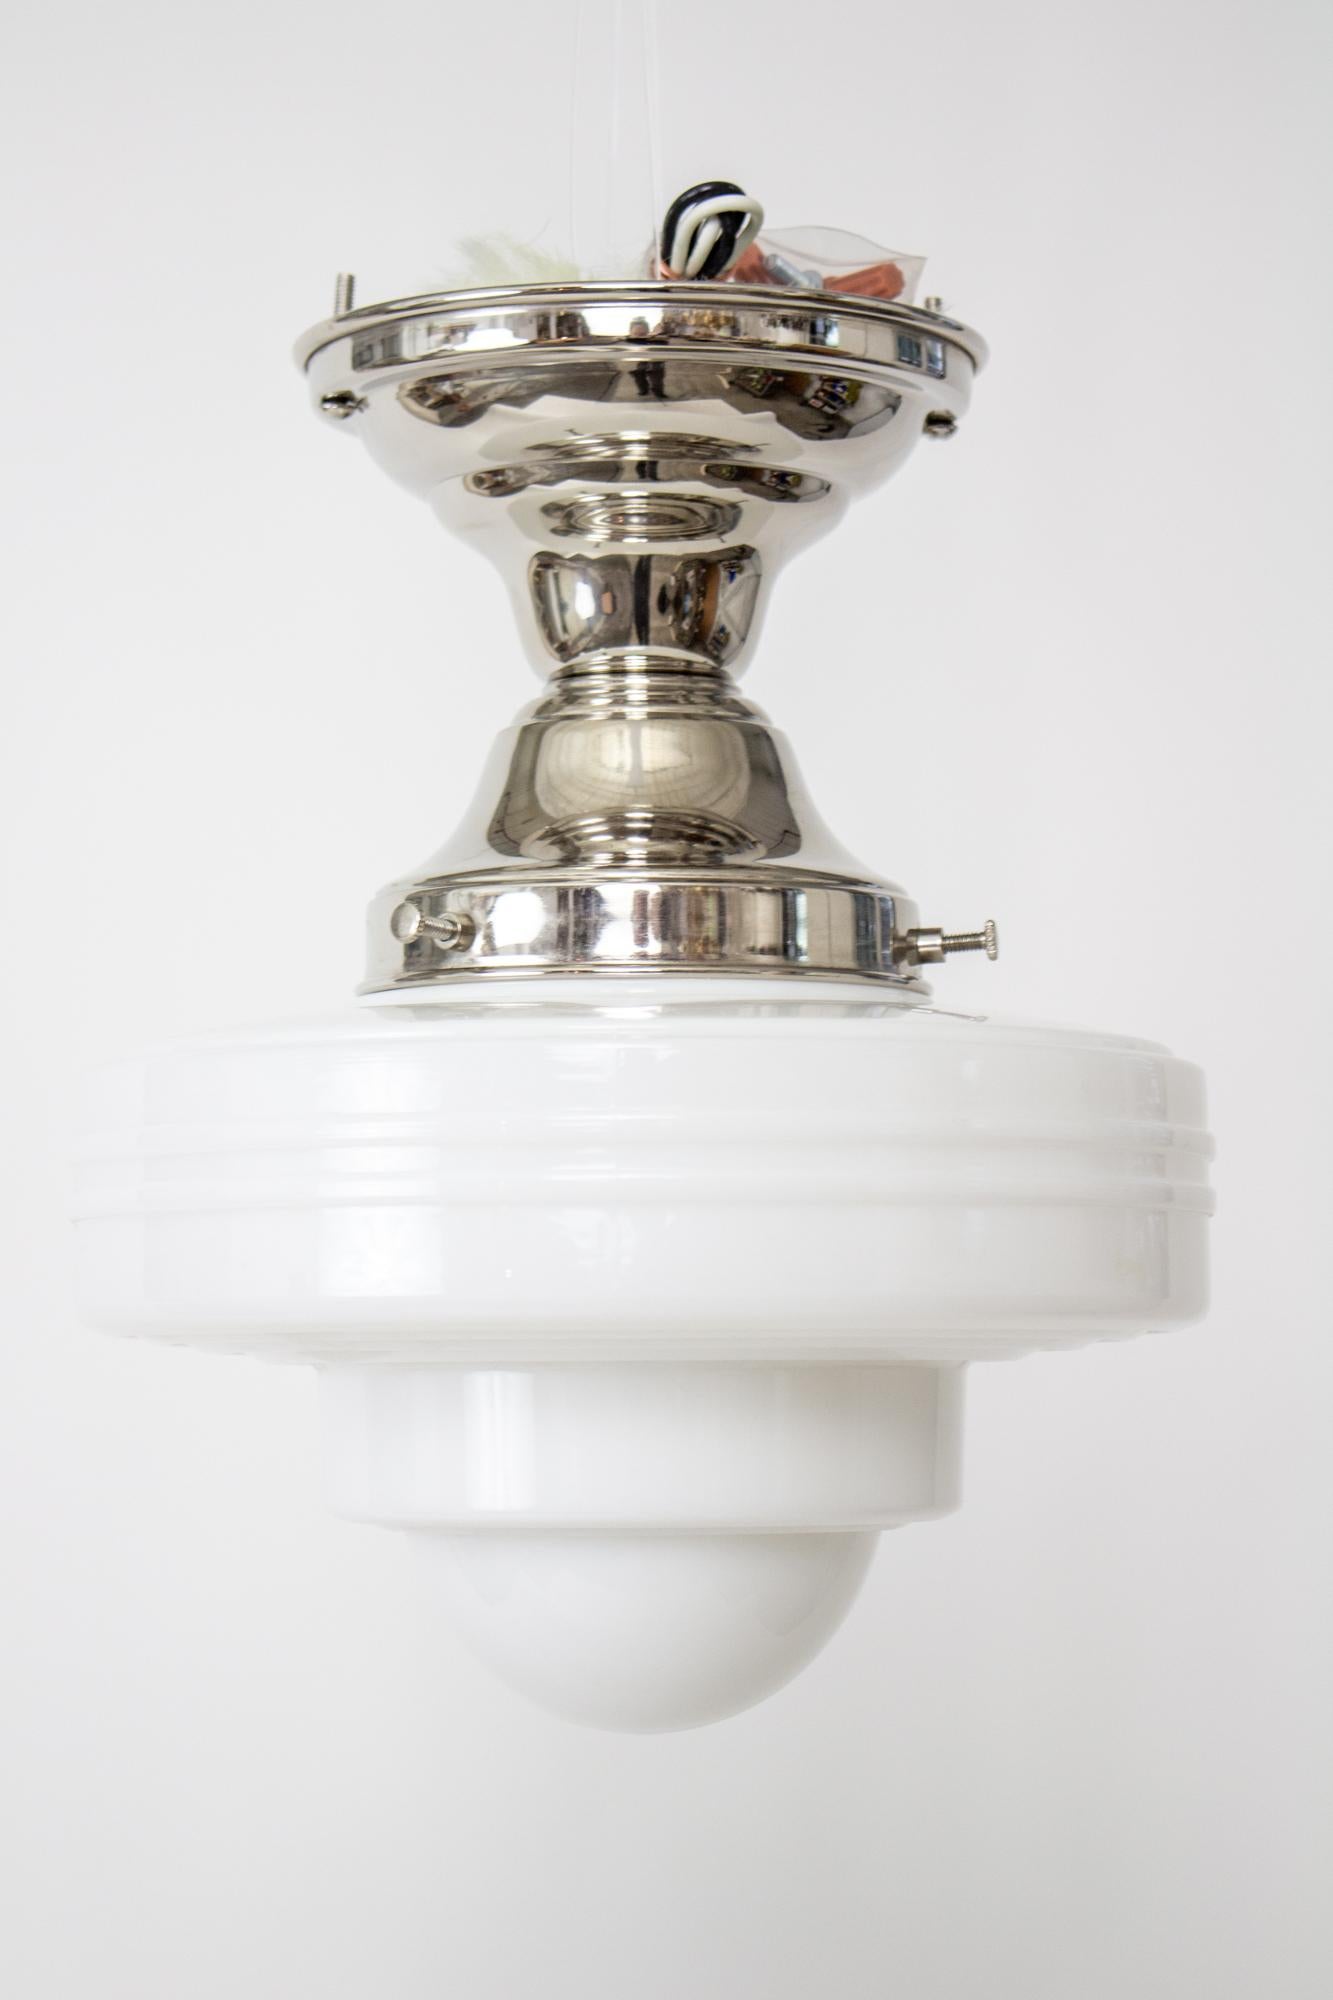 Art Deco UFO style milk glass mounted on a new polished nickel fixture. Excellent for use in a hallway, kitchen, or bathroom. Glass is american, circa 1930. Ribbed with a domed bottom. Excellent condition. Single Edison base socket, 60 watt max.